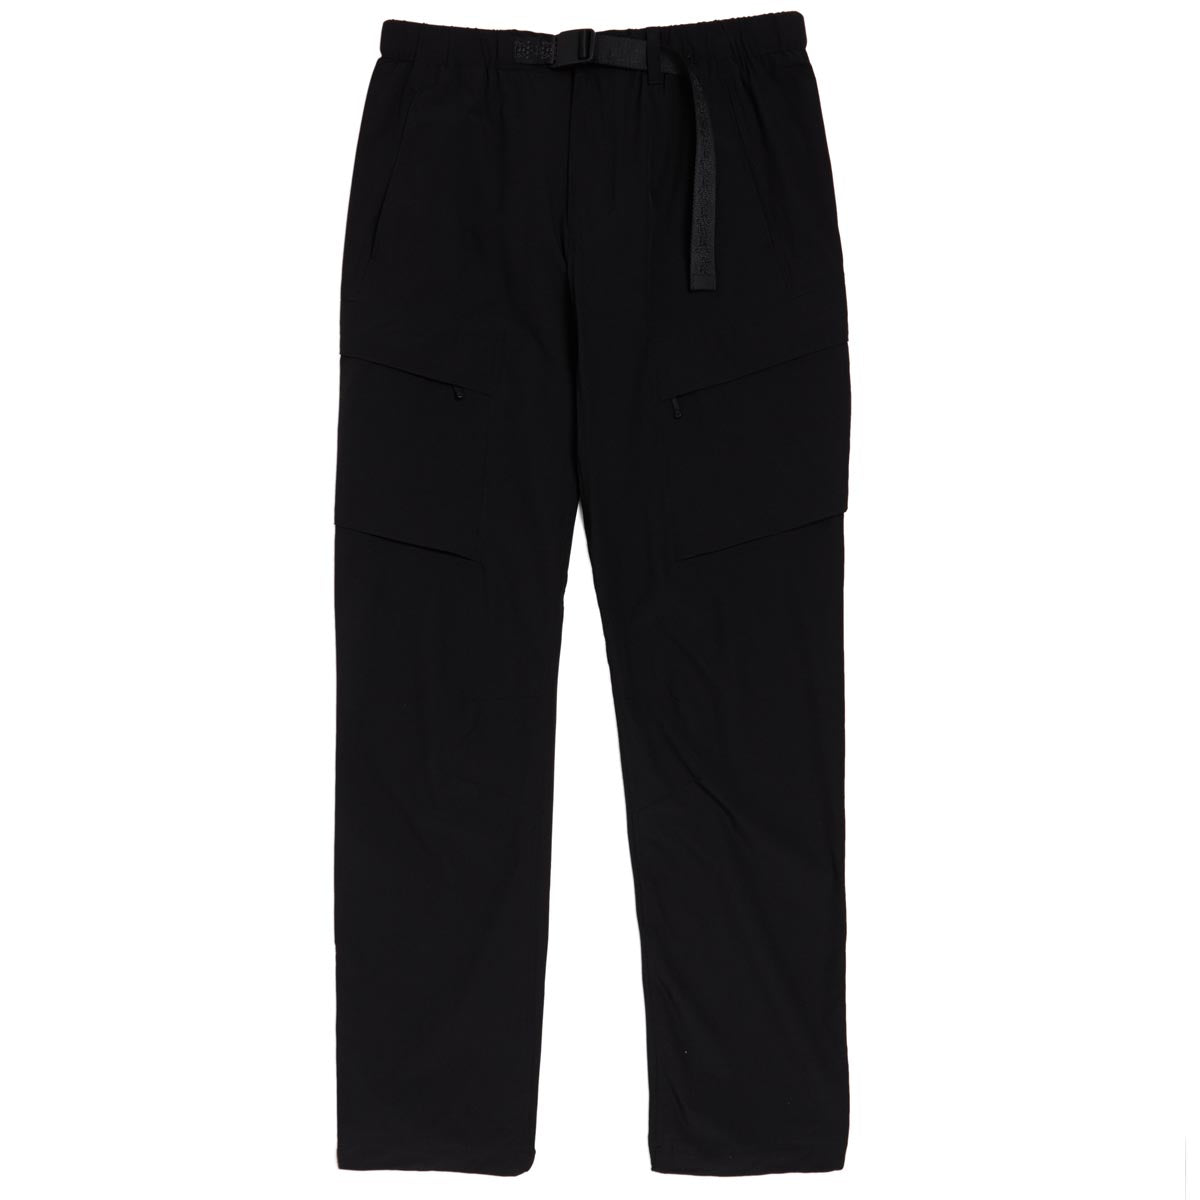 Kennedy The Ascension Cargo Pants - Black image 1